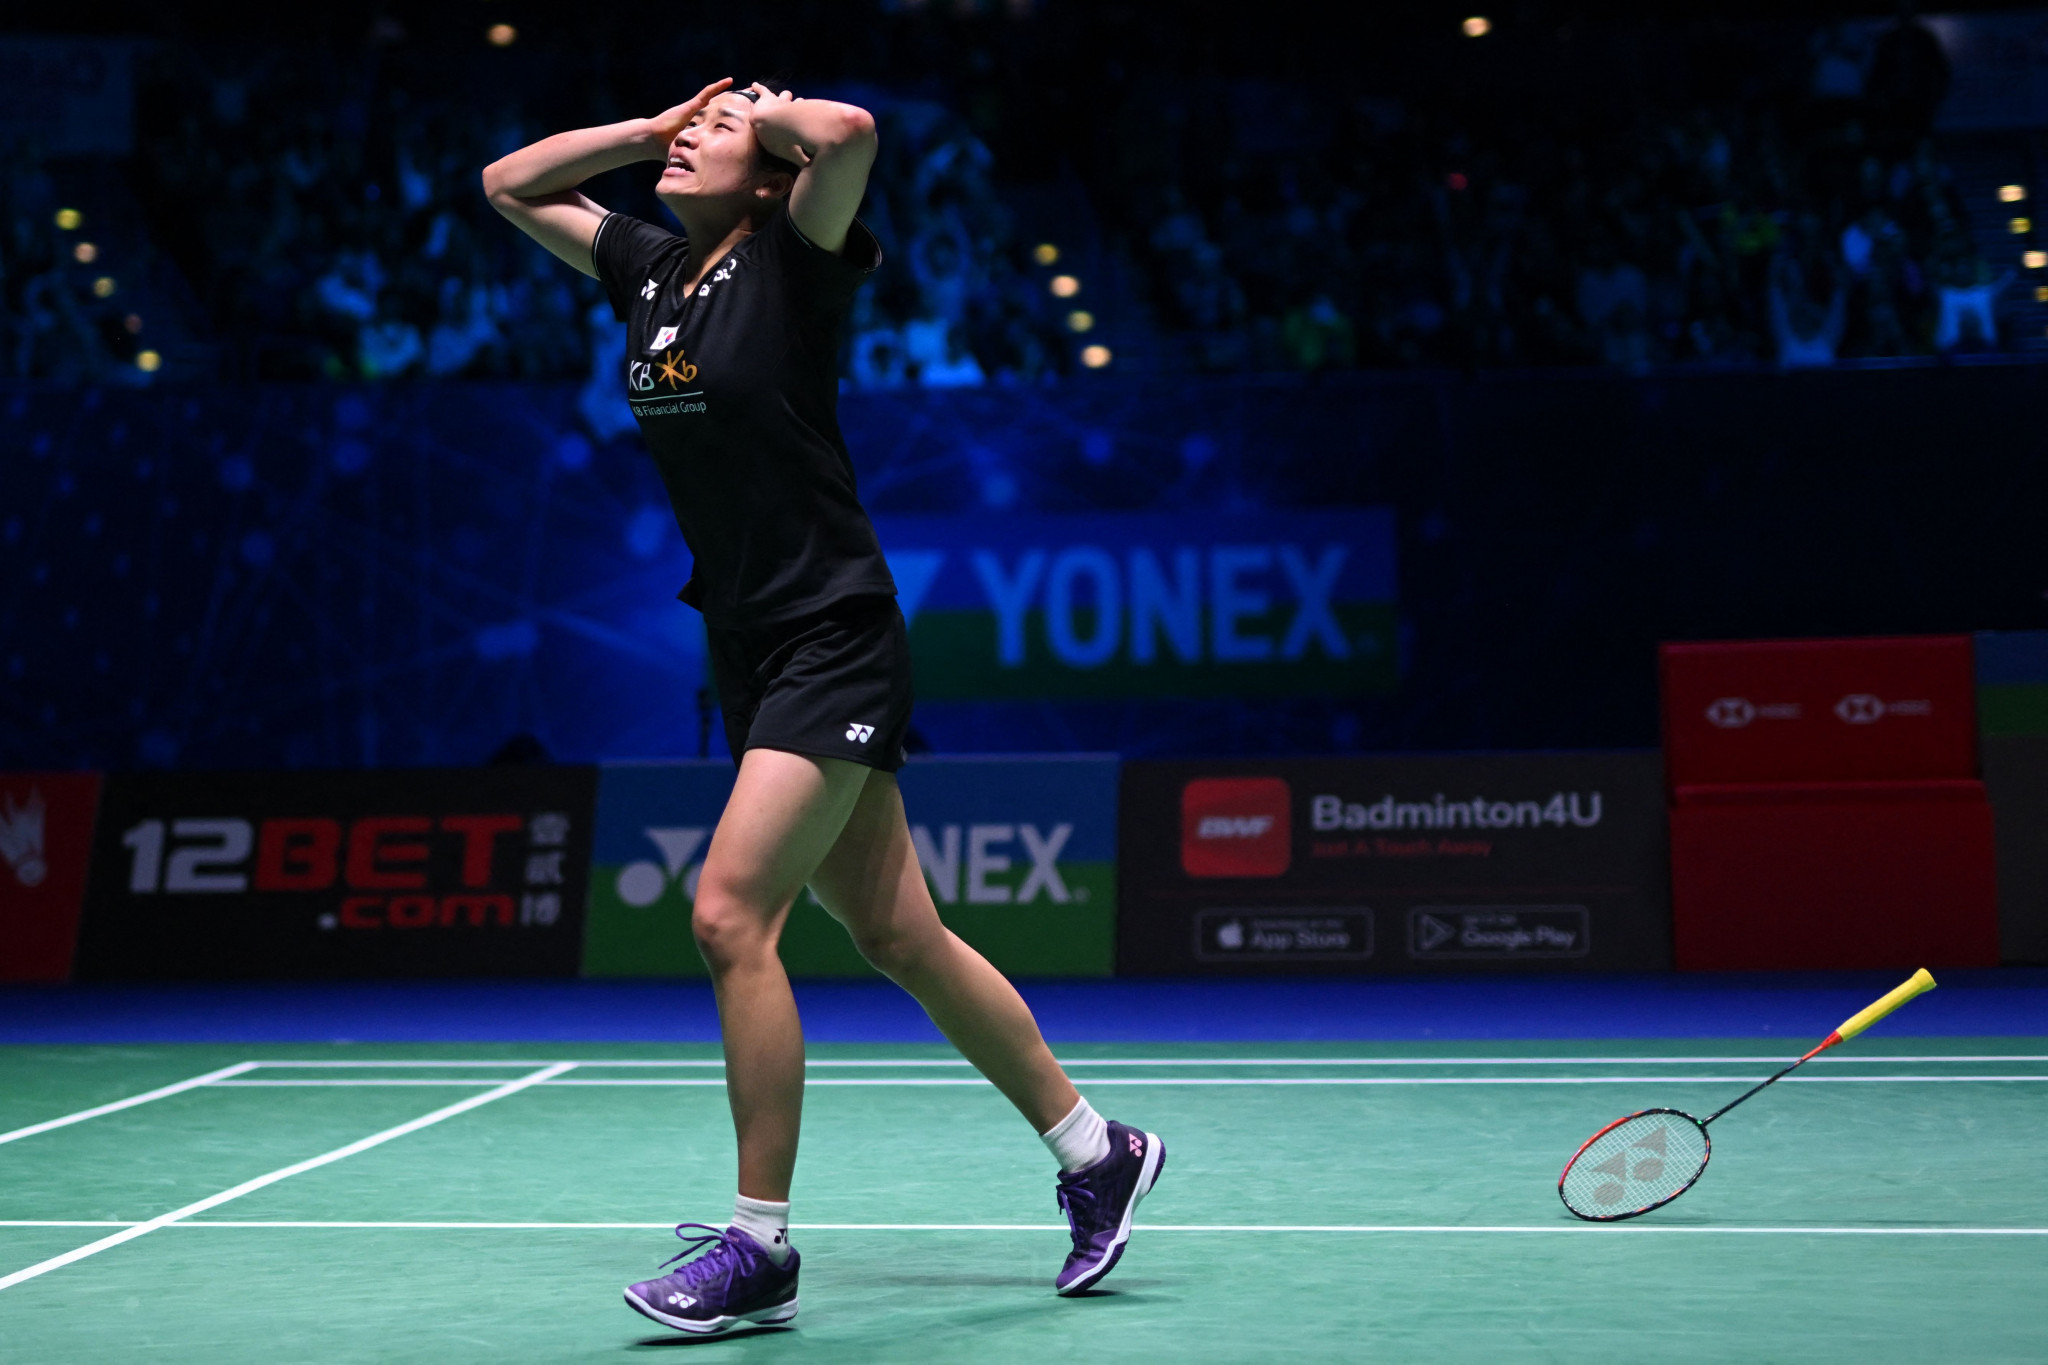 An Se-Young wins women’s singles crown as she claims victory at All England Open